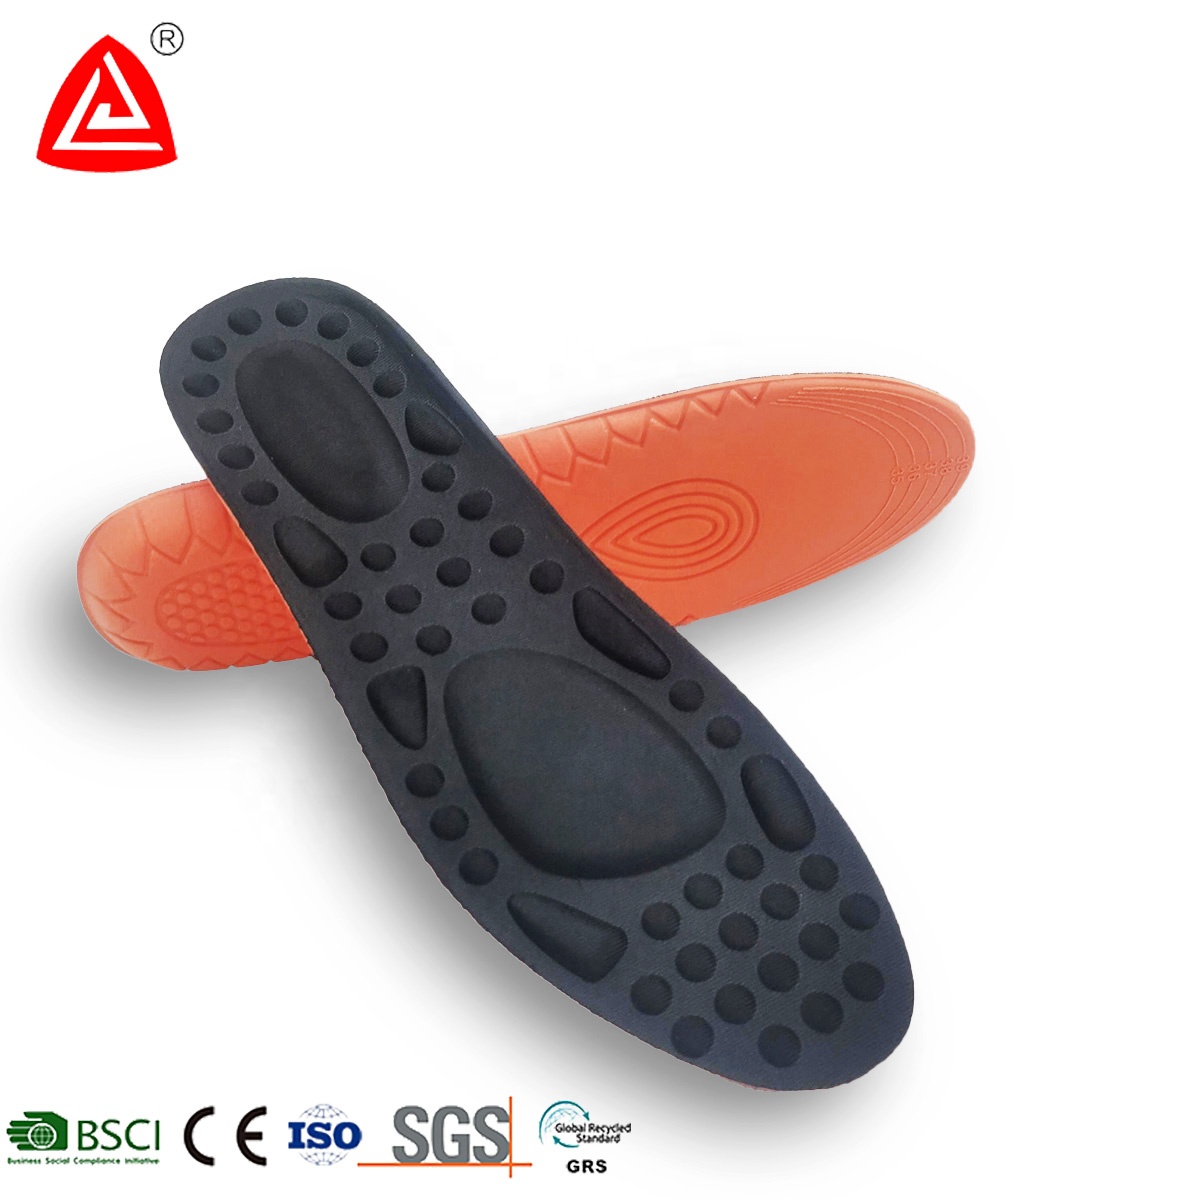 How to clean the insole